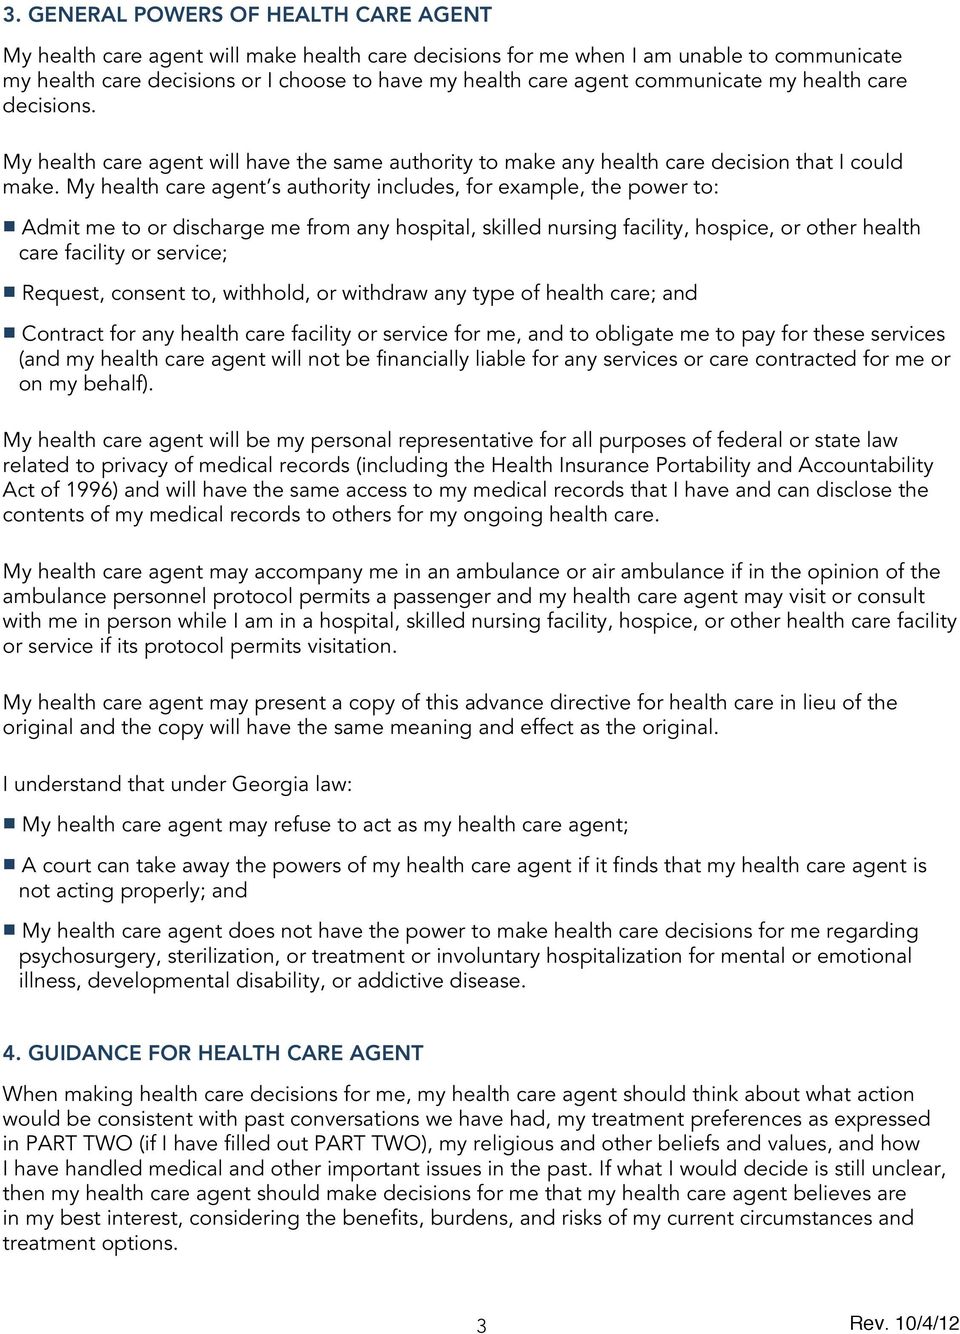 My health care agent s authority includes, for example, the power to: Admit me to or discharge me from any hospital, skilled nursing facility, hospice, or other health care facility or service;